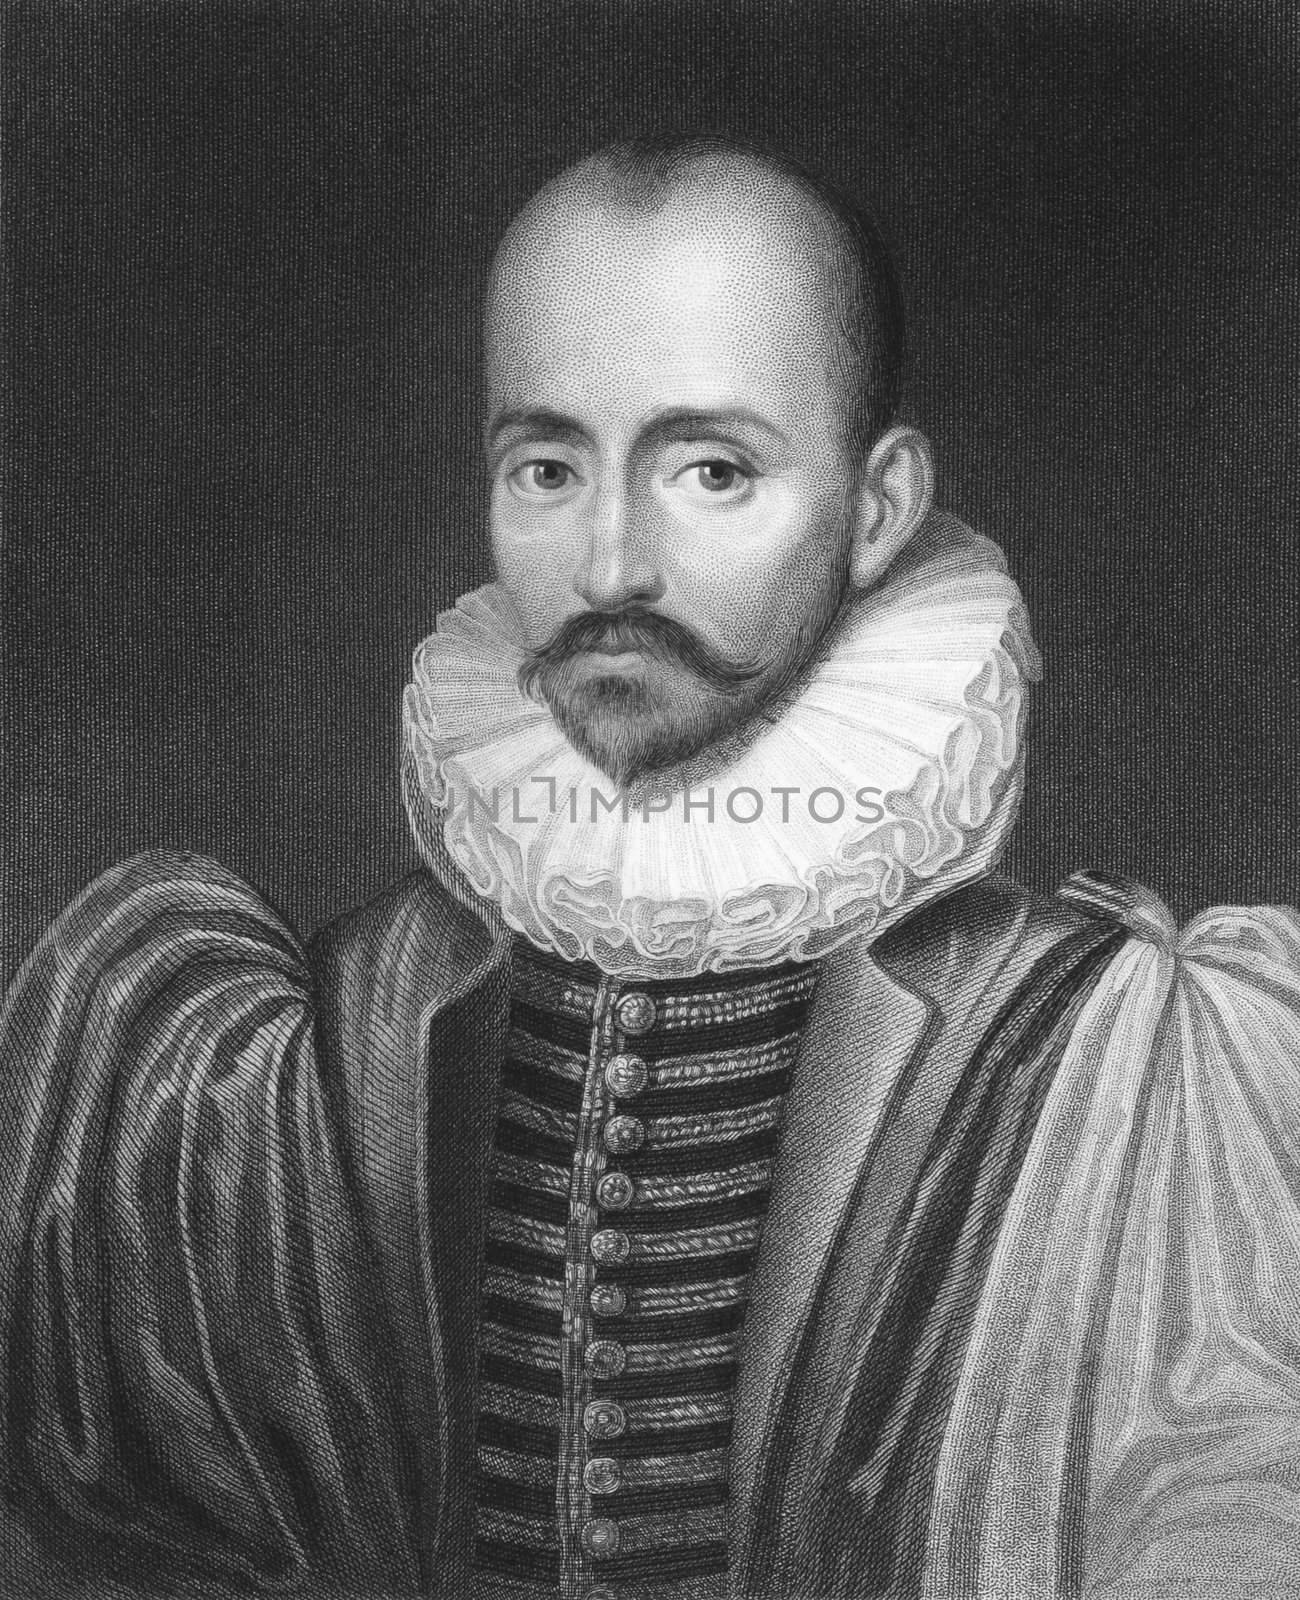 Michel de Montaigne on engraving from the 1850s. One of the most influential writers of the French renaissance.